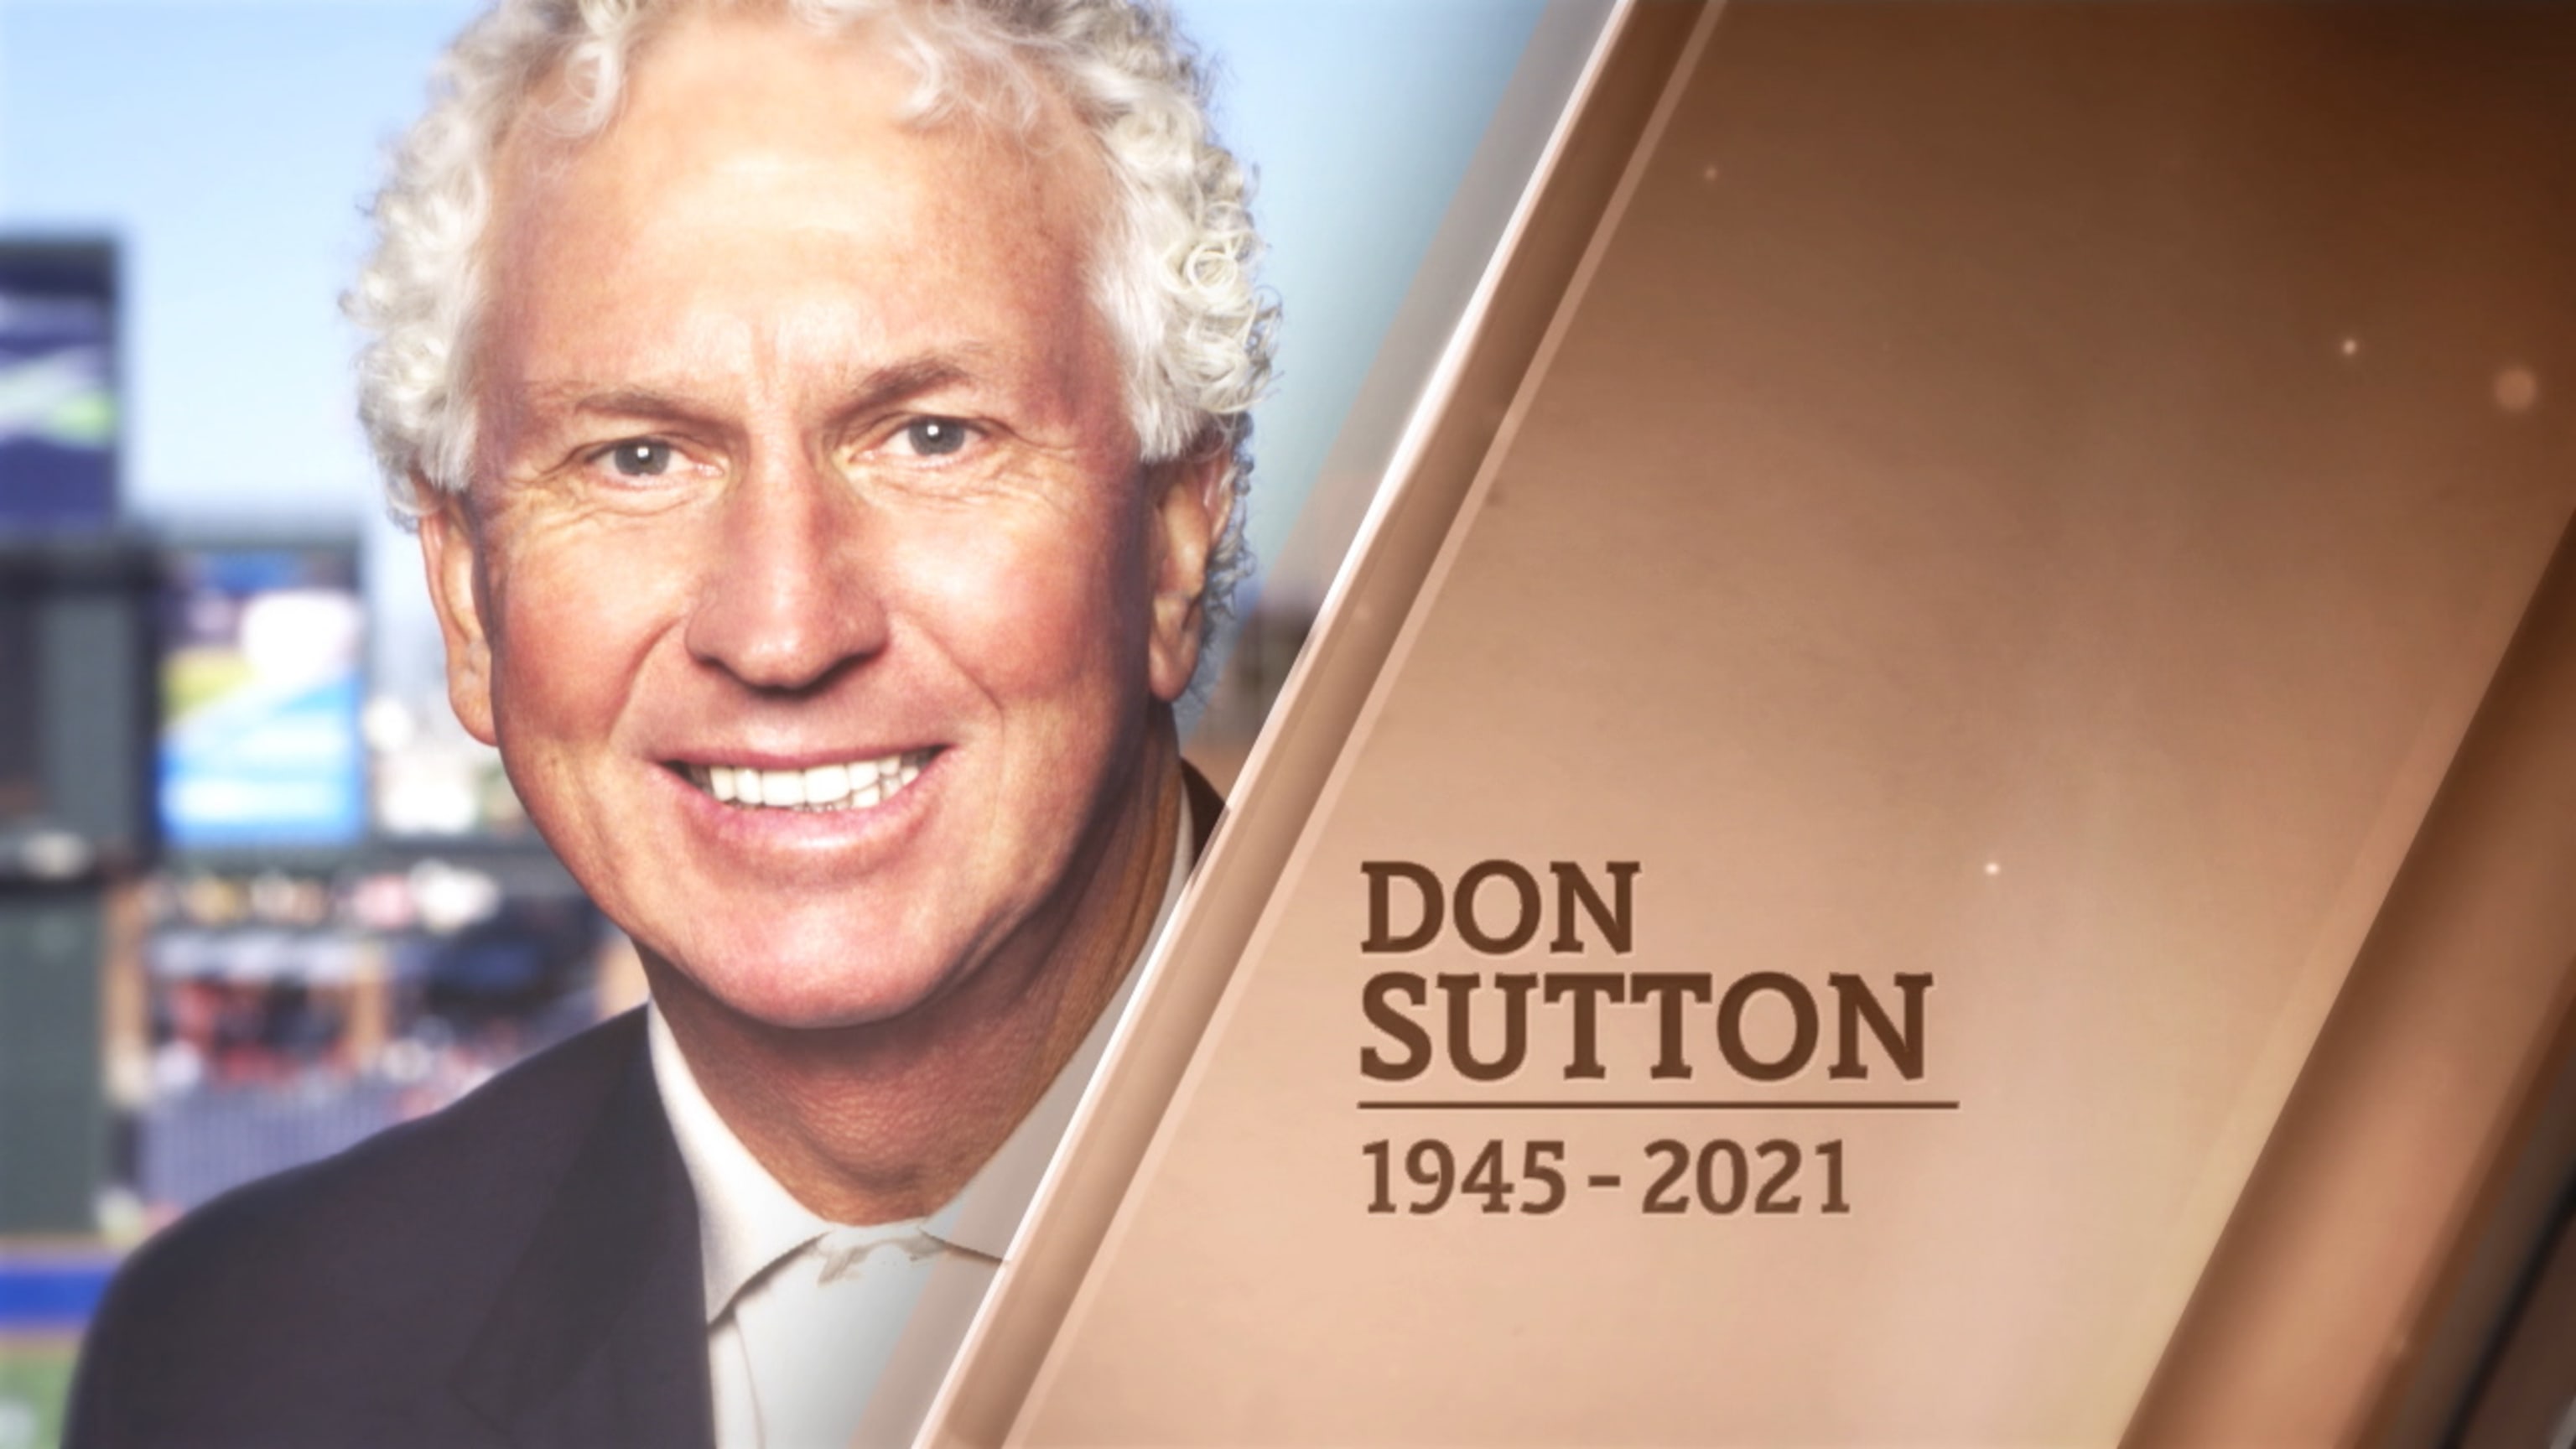 MLB Network remembers Don Sutton